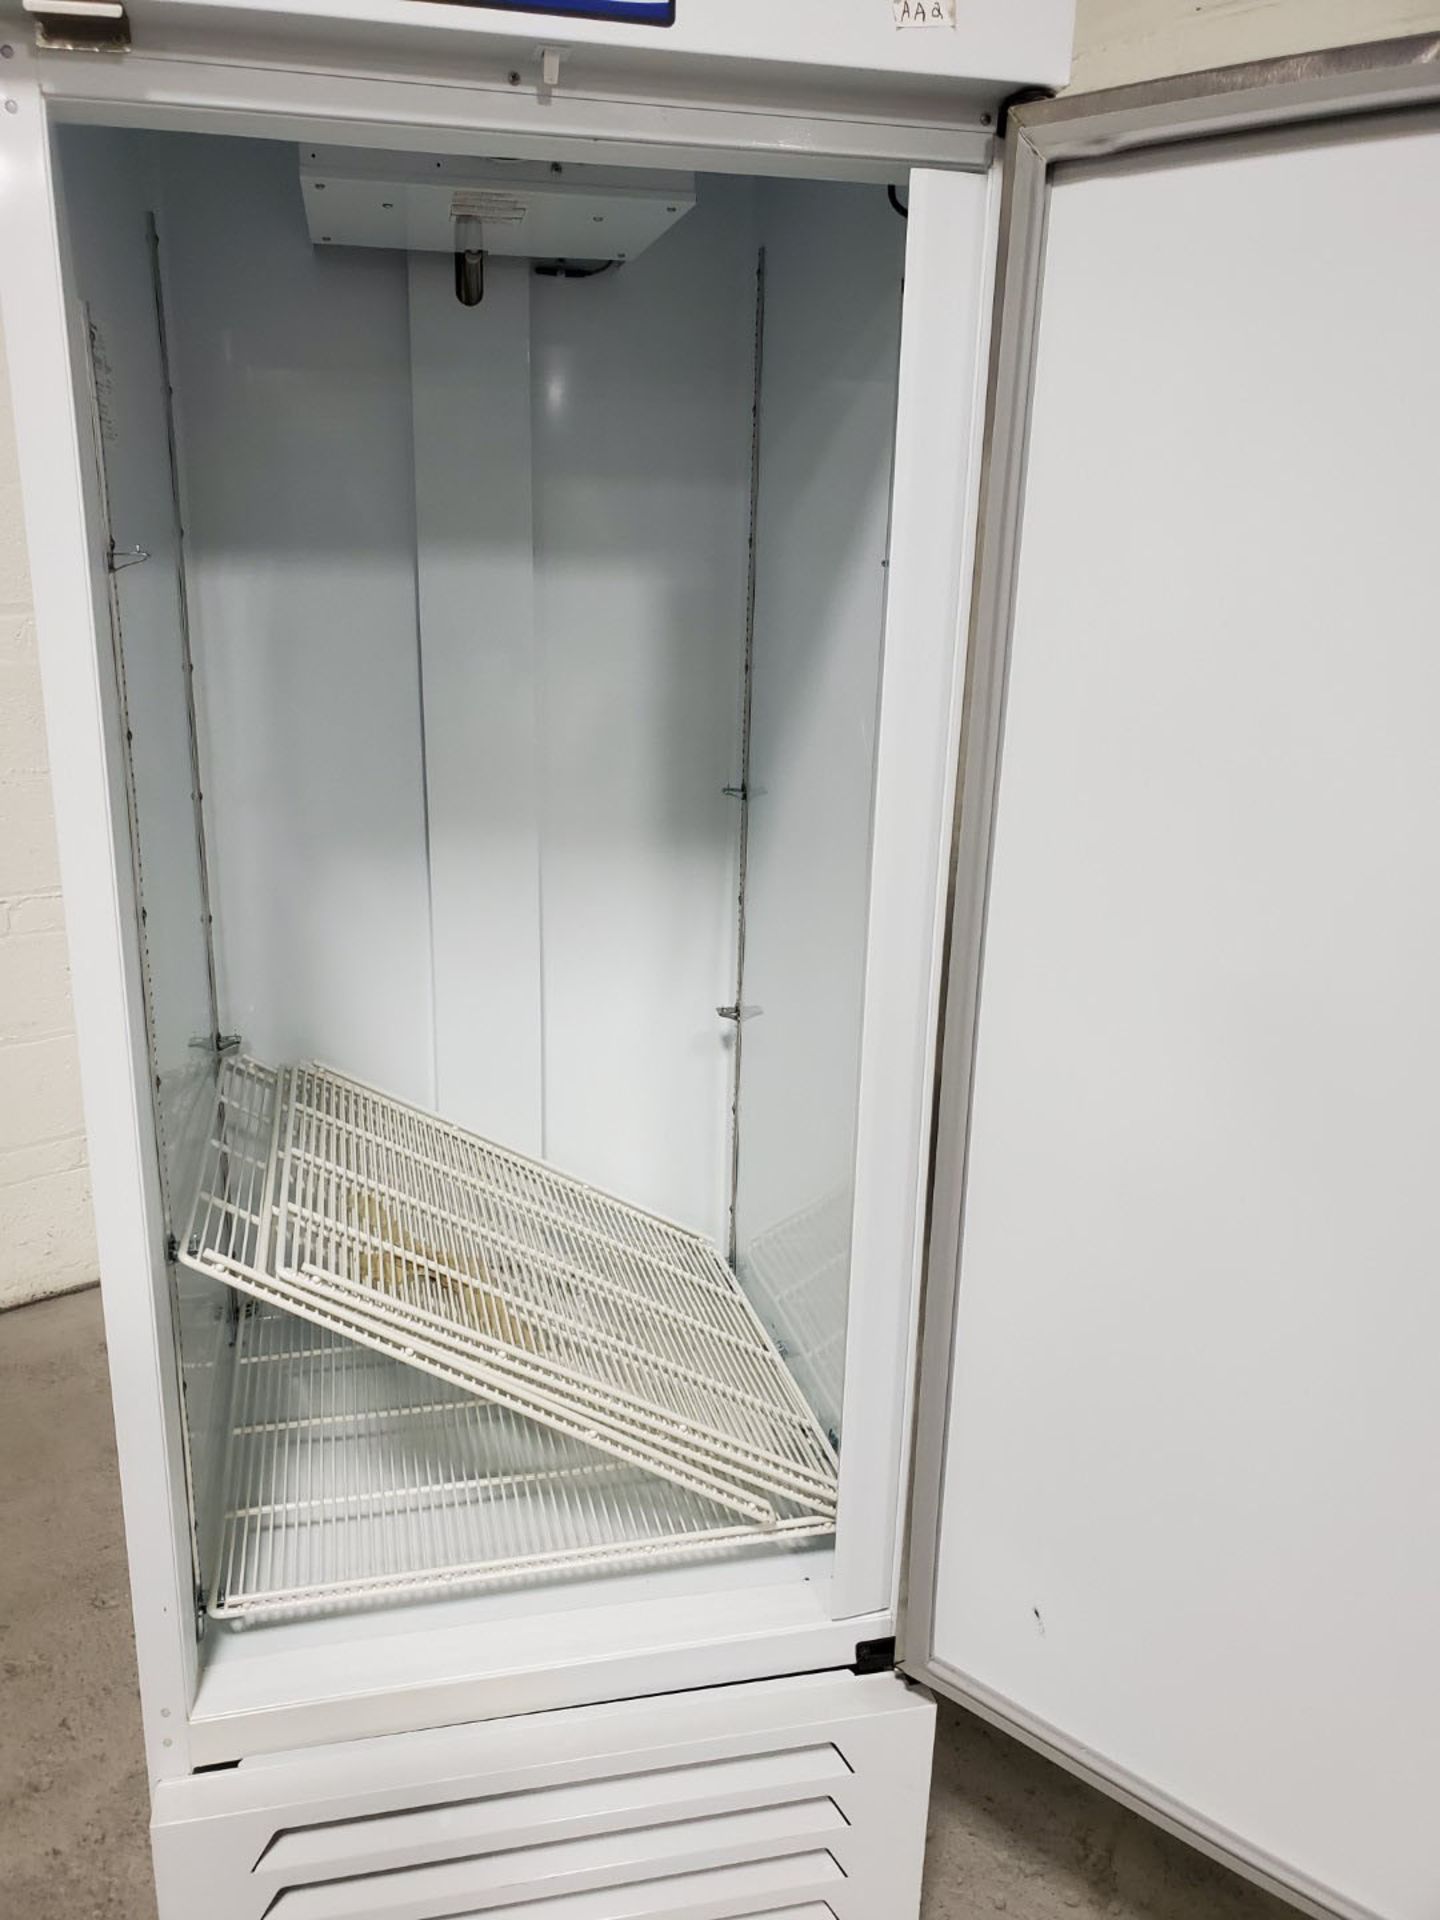 Fisher Scientific Isotemp Freezer, Model MR30PA - Image 4 of 5